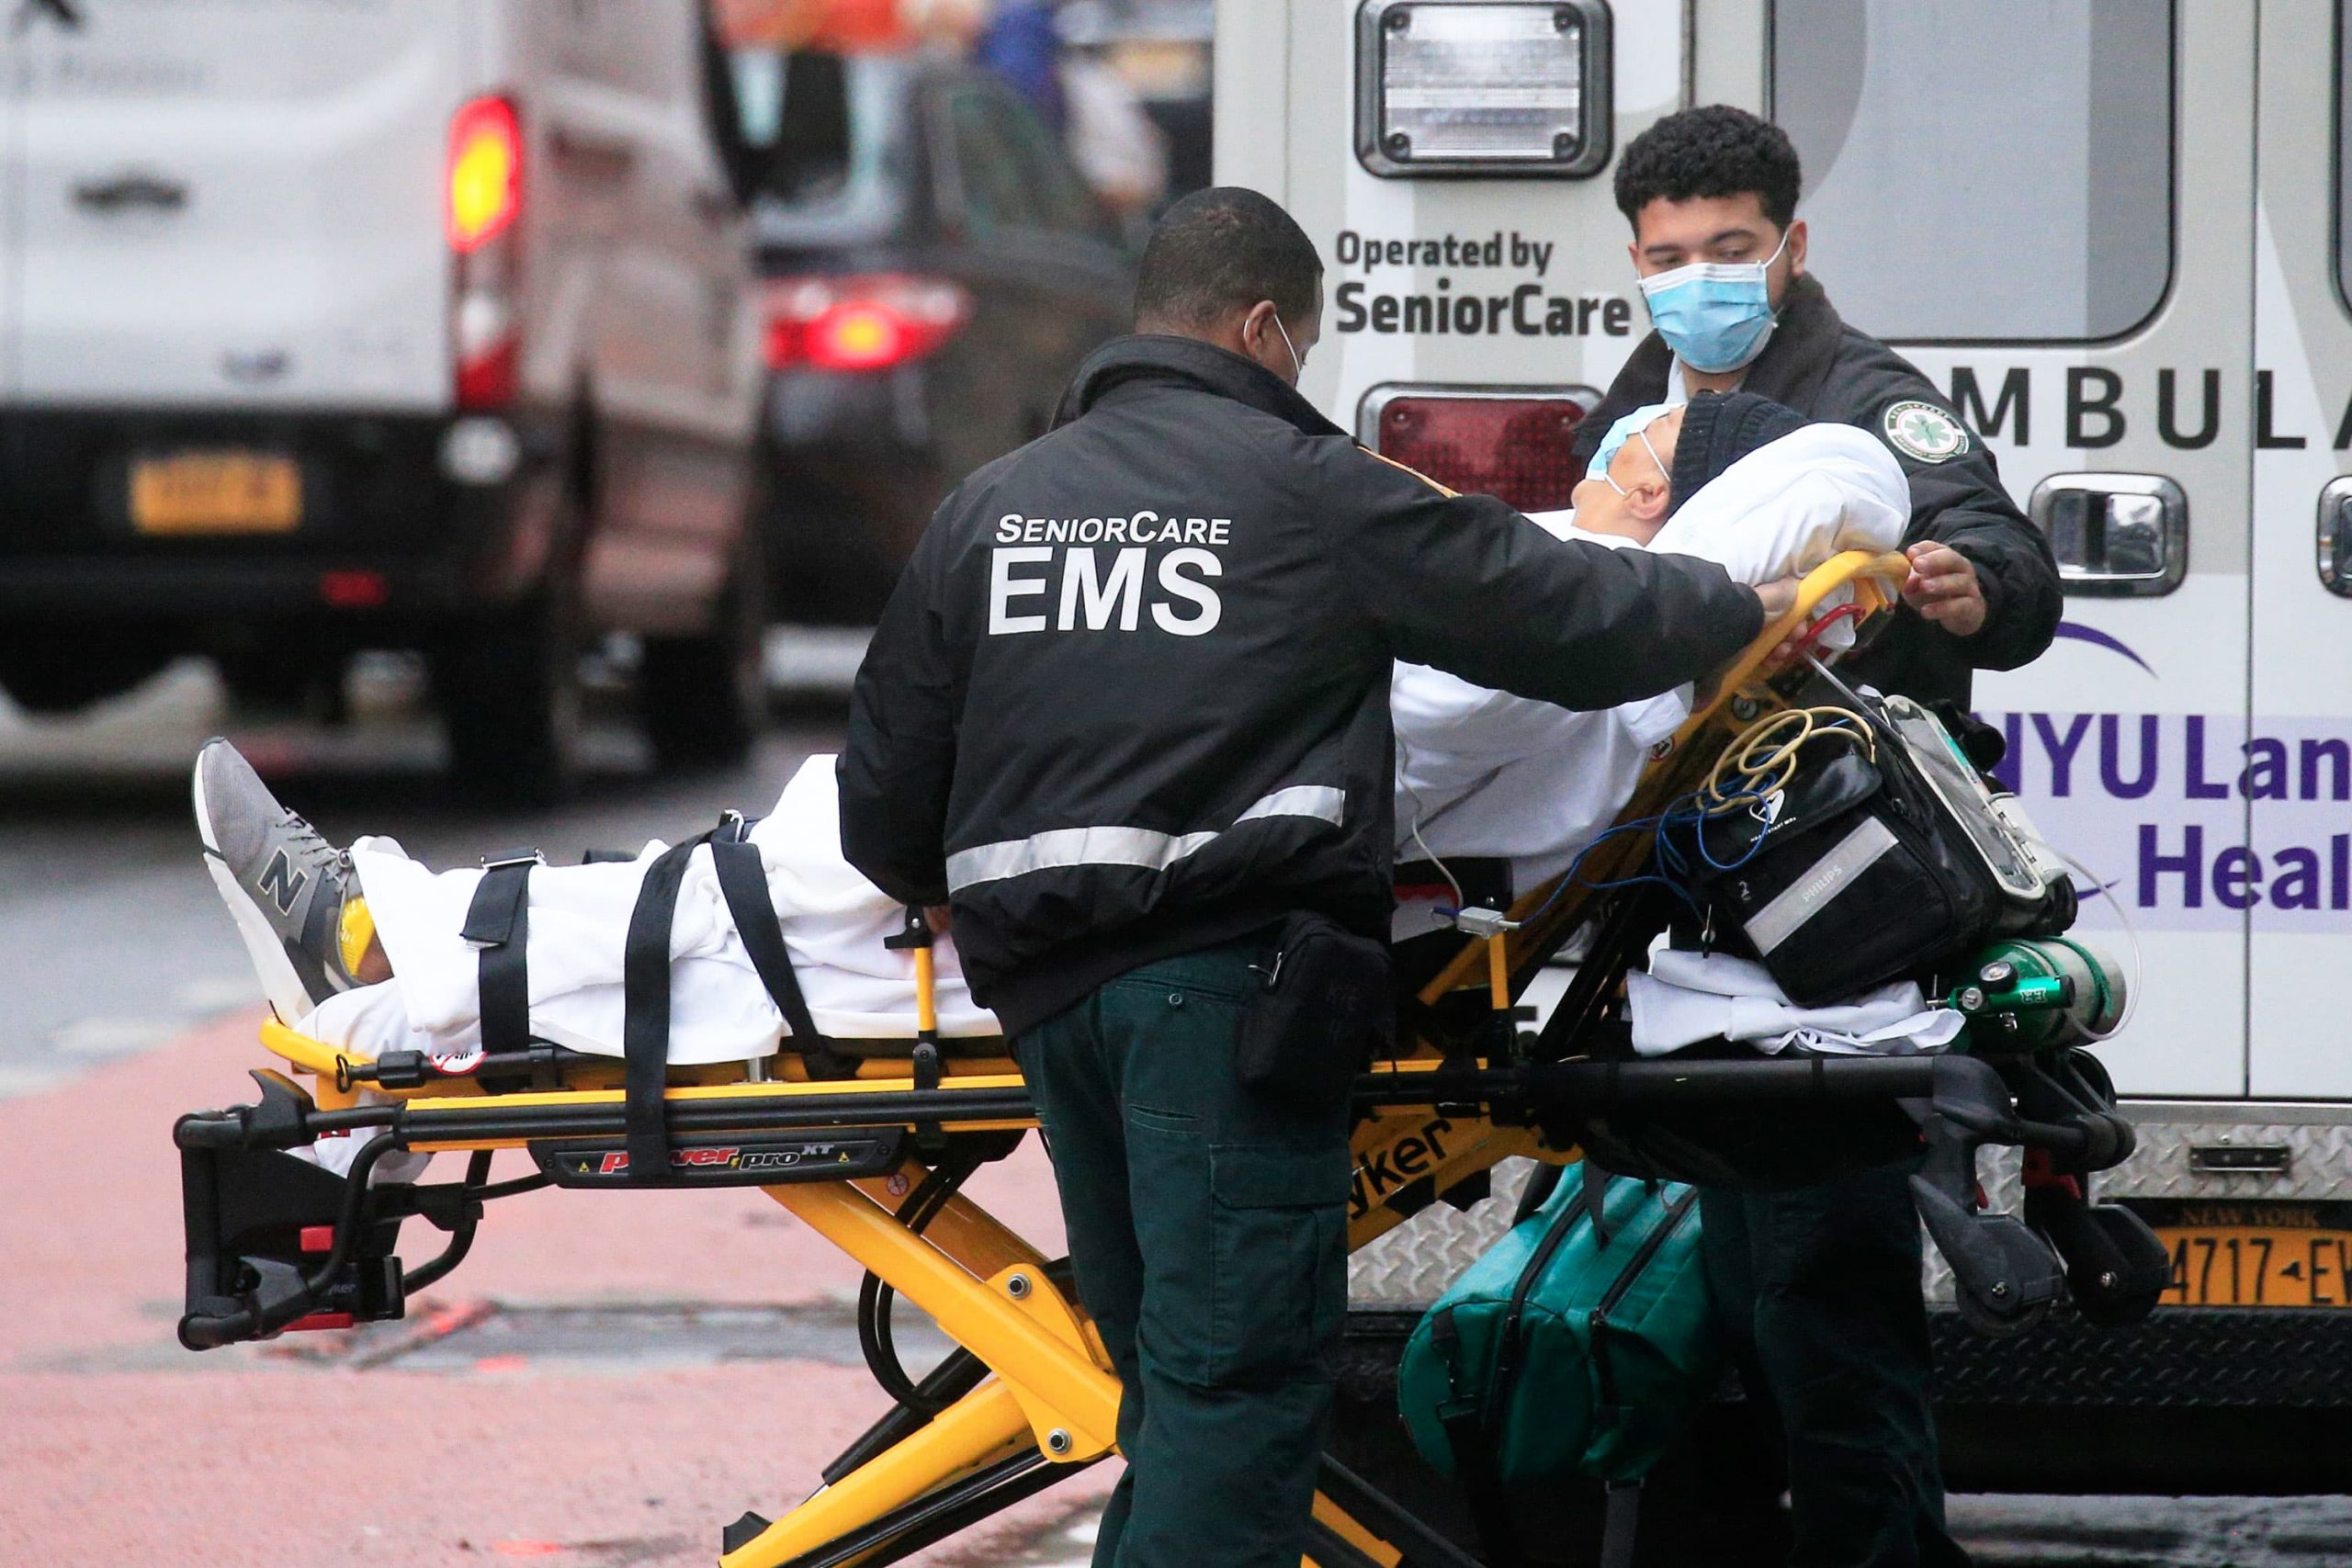 New York implements emergency hospital measures as Covid circumstances surge, Gov. Cuomo says